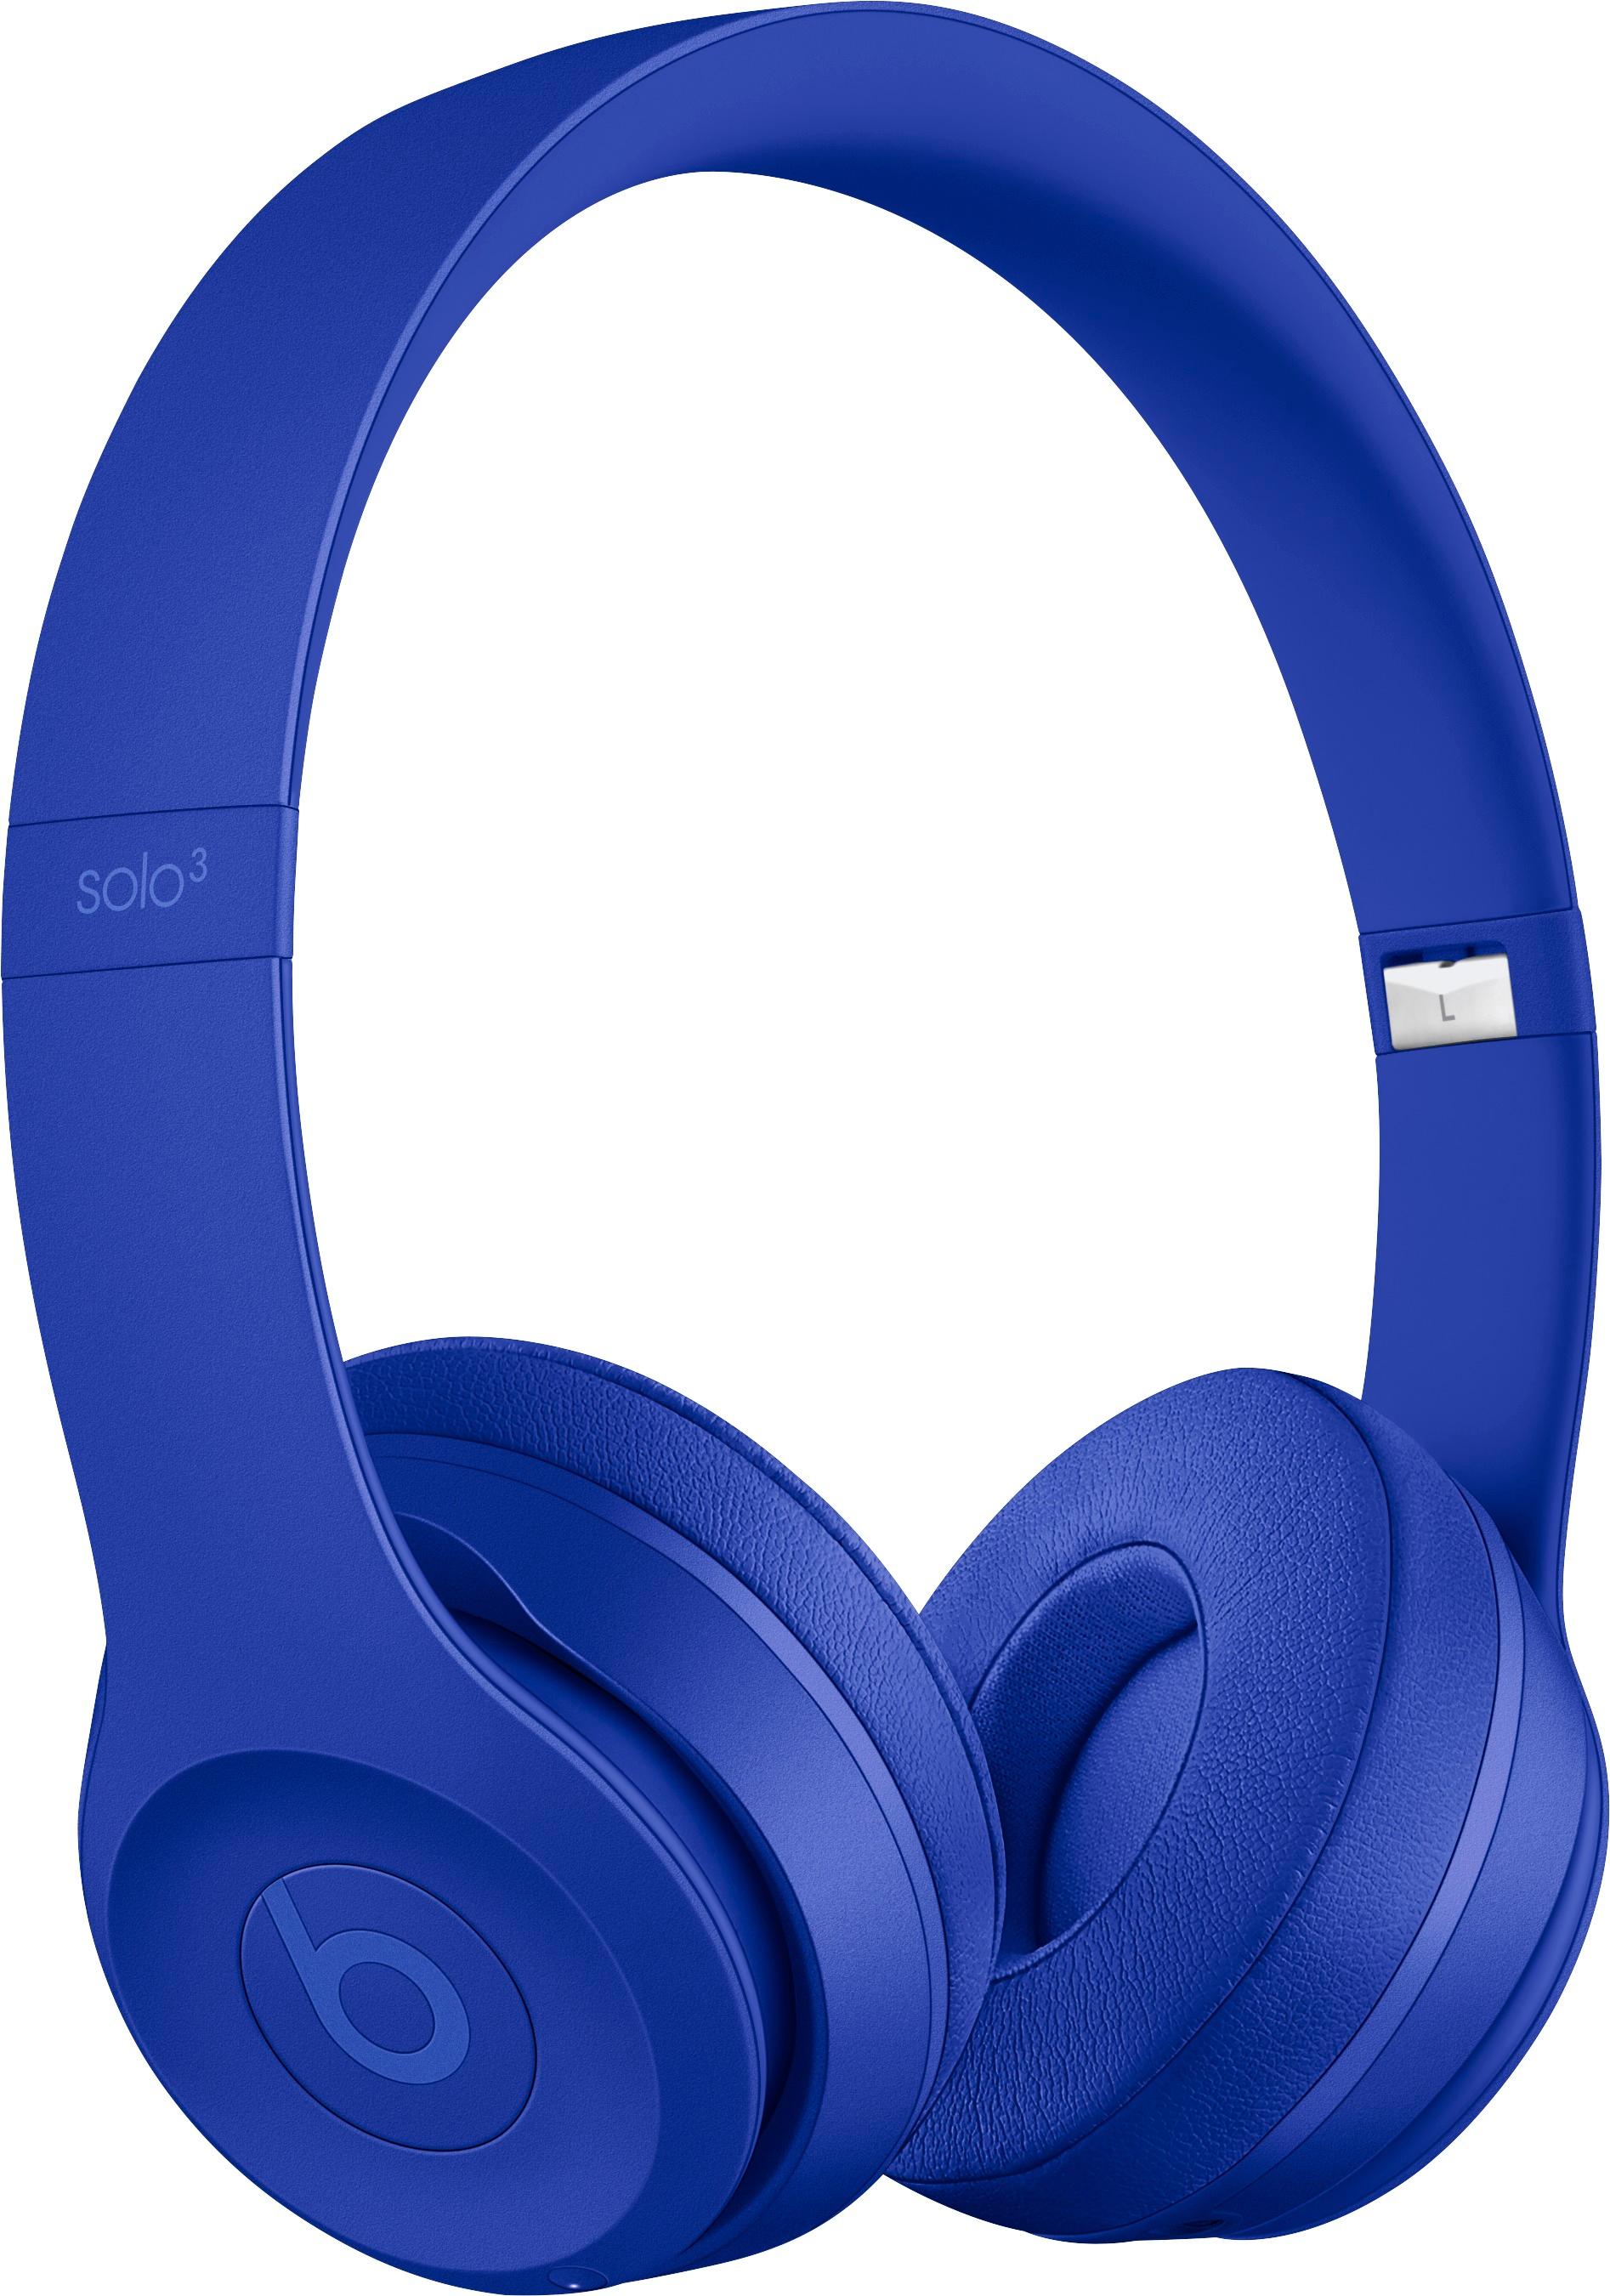 Beats by Dr. Dre Solo3 Wireless Headphones Neighborhood Collection 